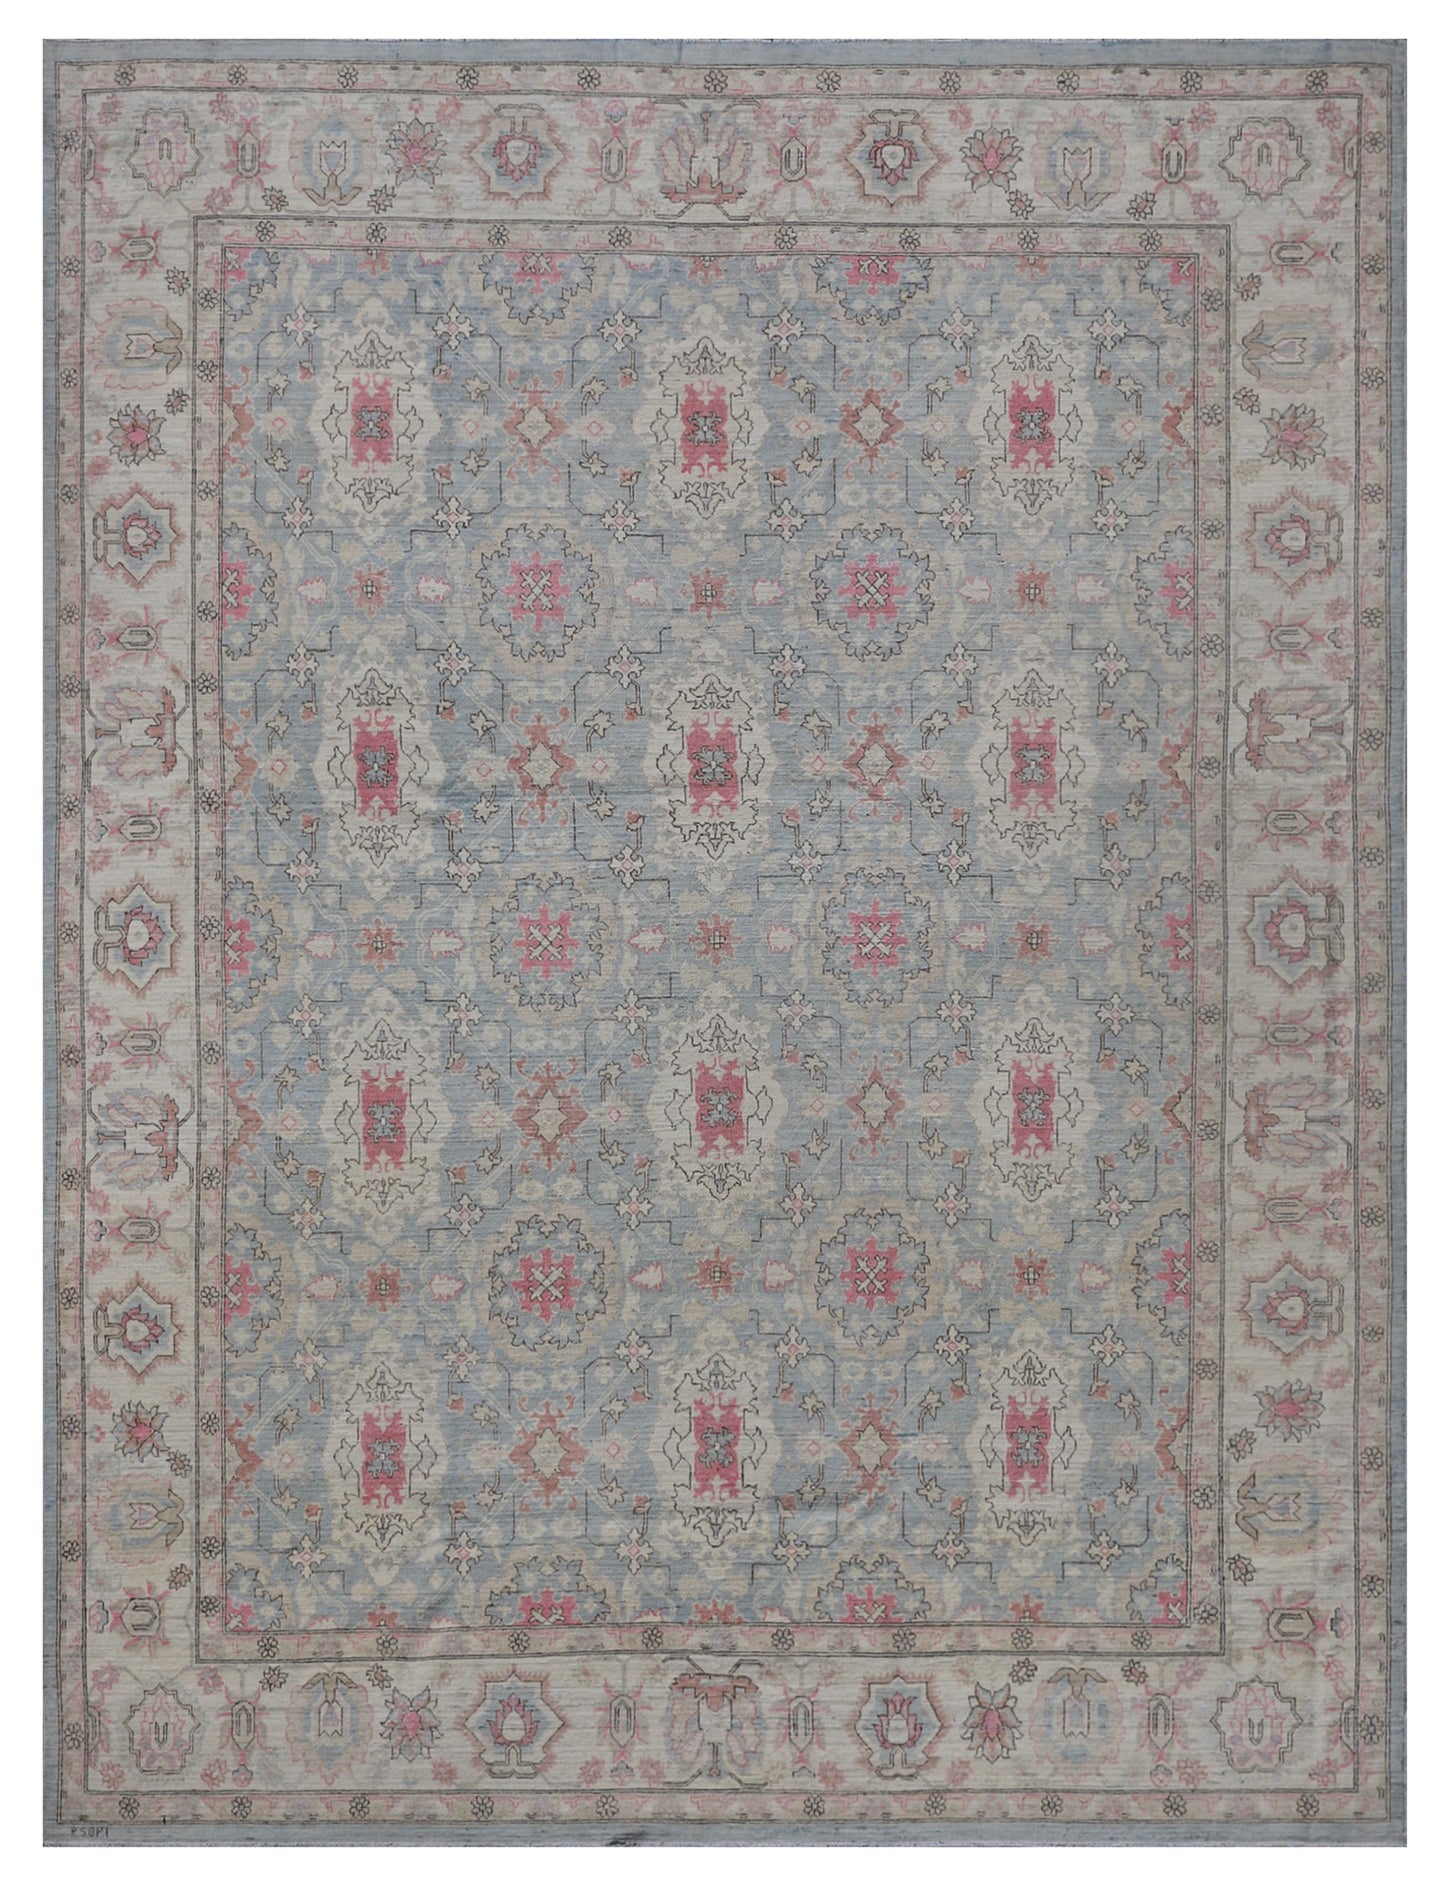 8'x10' Blue and Red Agra Design Classic Ariana Traditional Area Rug